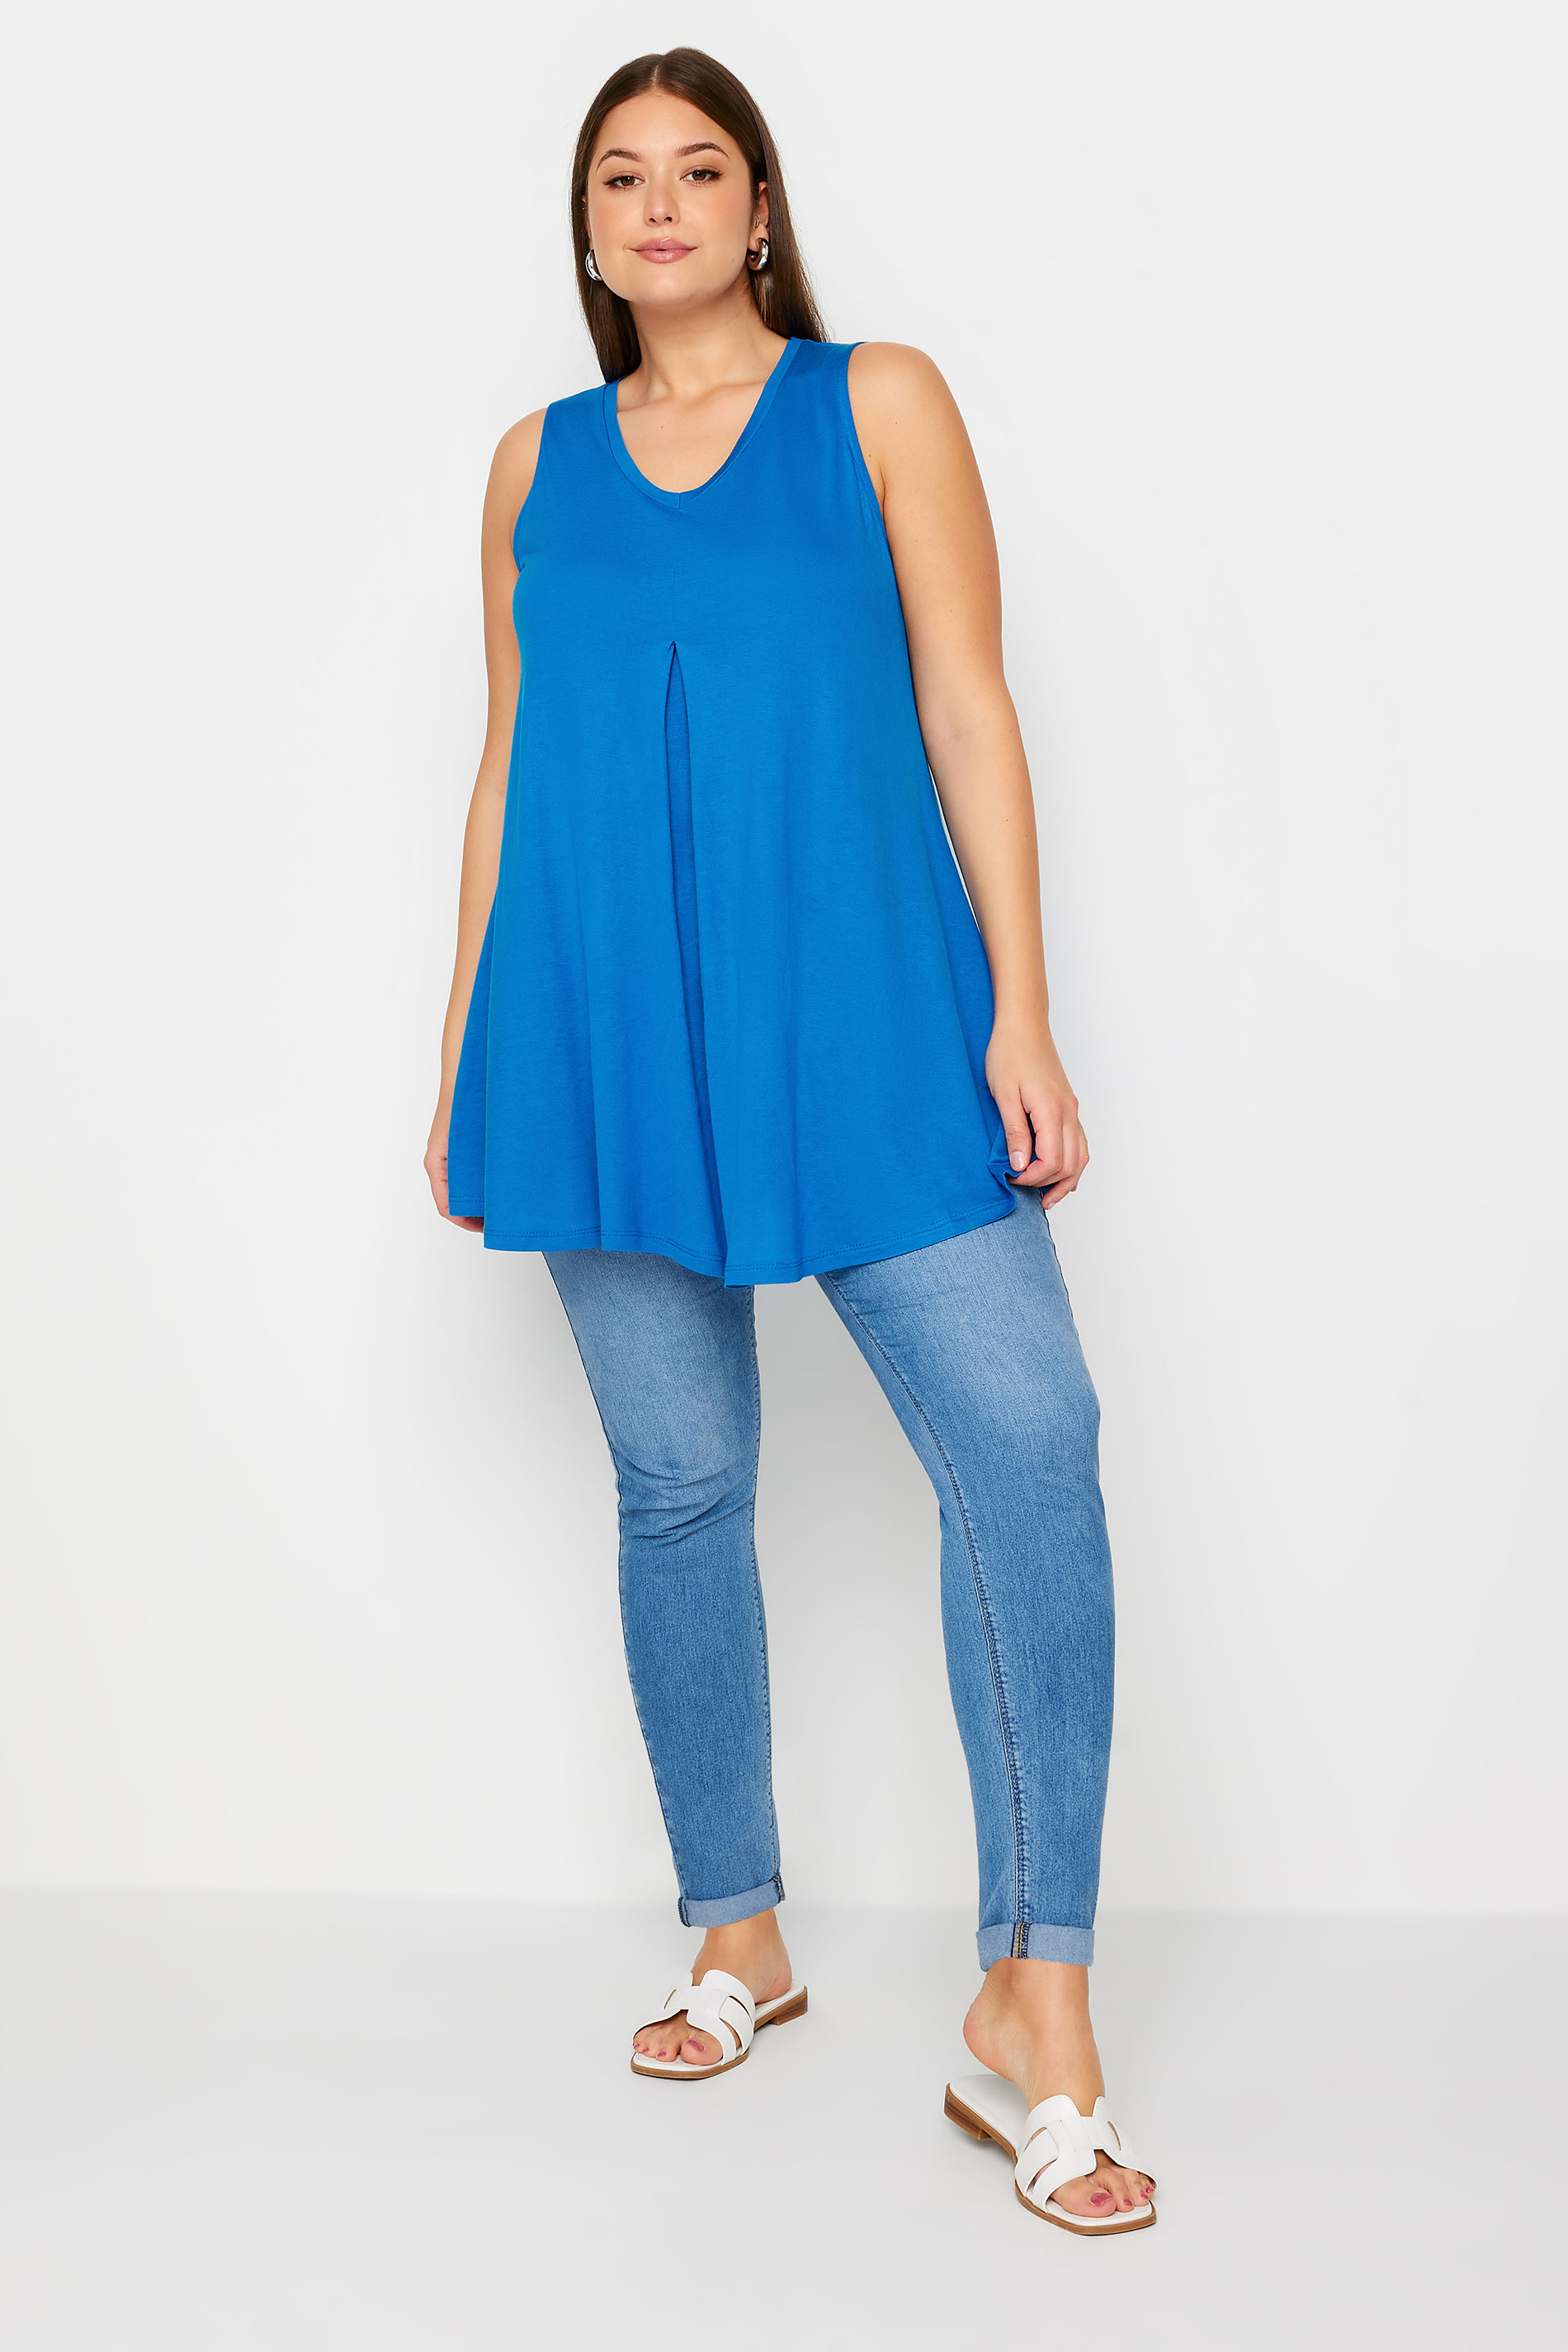 YOURS Plus Size Blue V-Neck Swing Vest Top | Yours Clothing 2